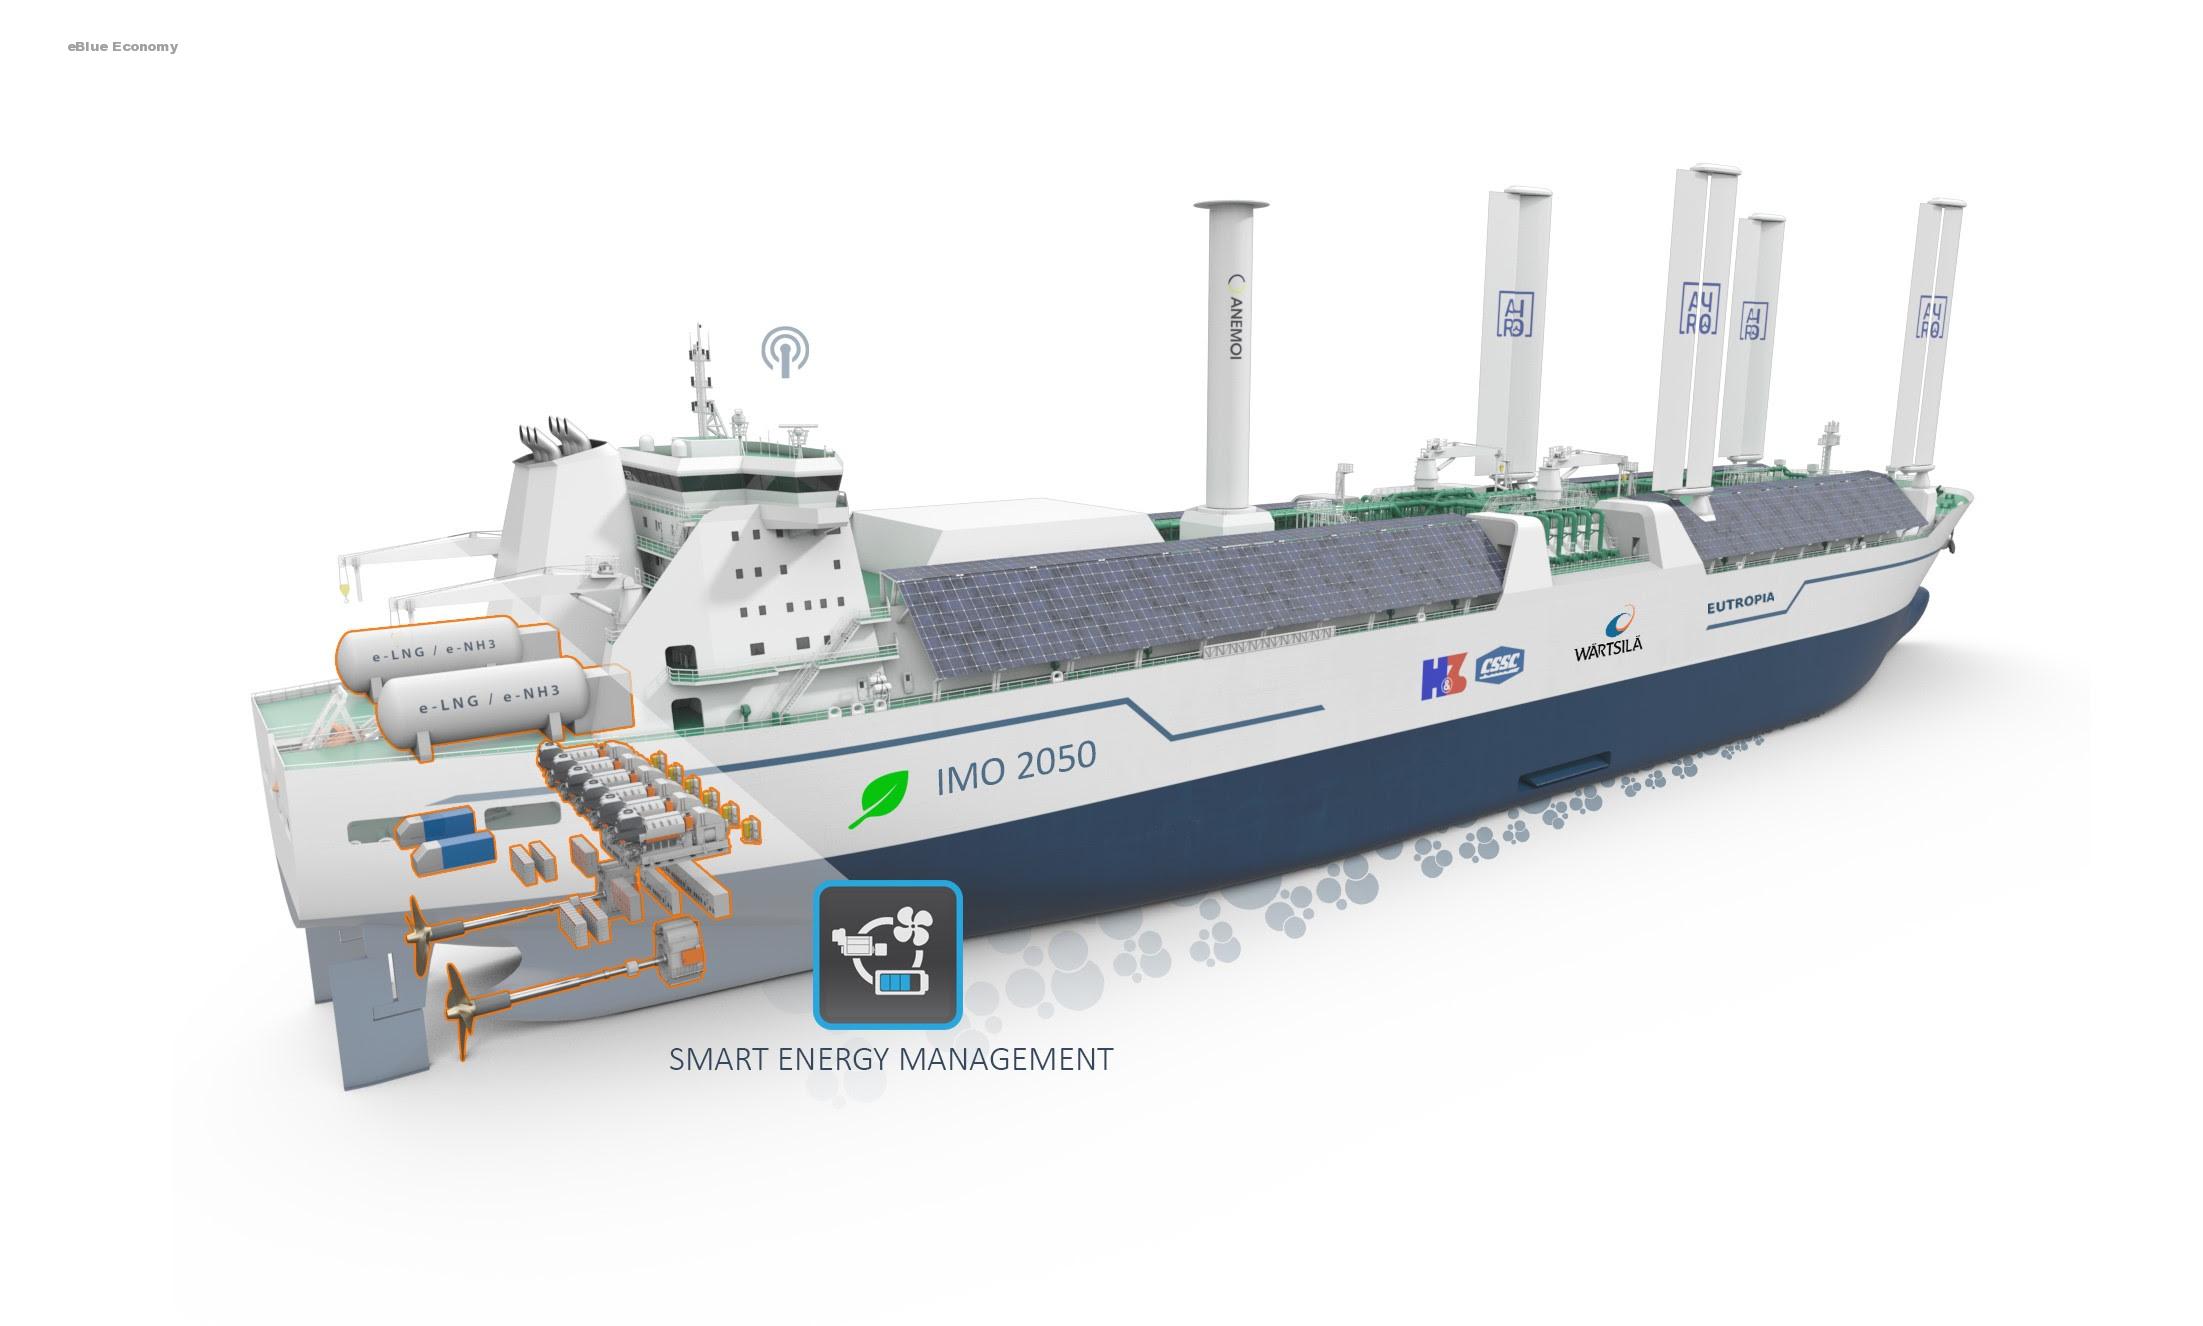 eBlue_economy_ Project for IMO 2050 CII-Ready LNG Carrier